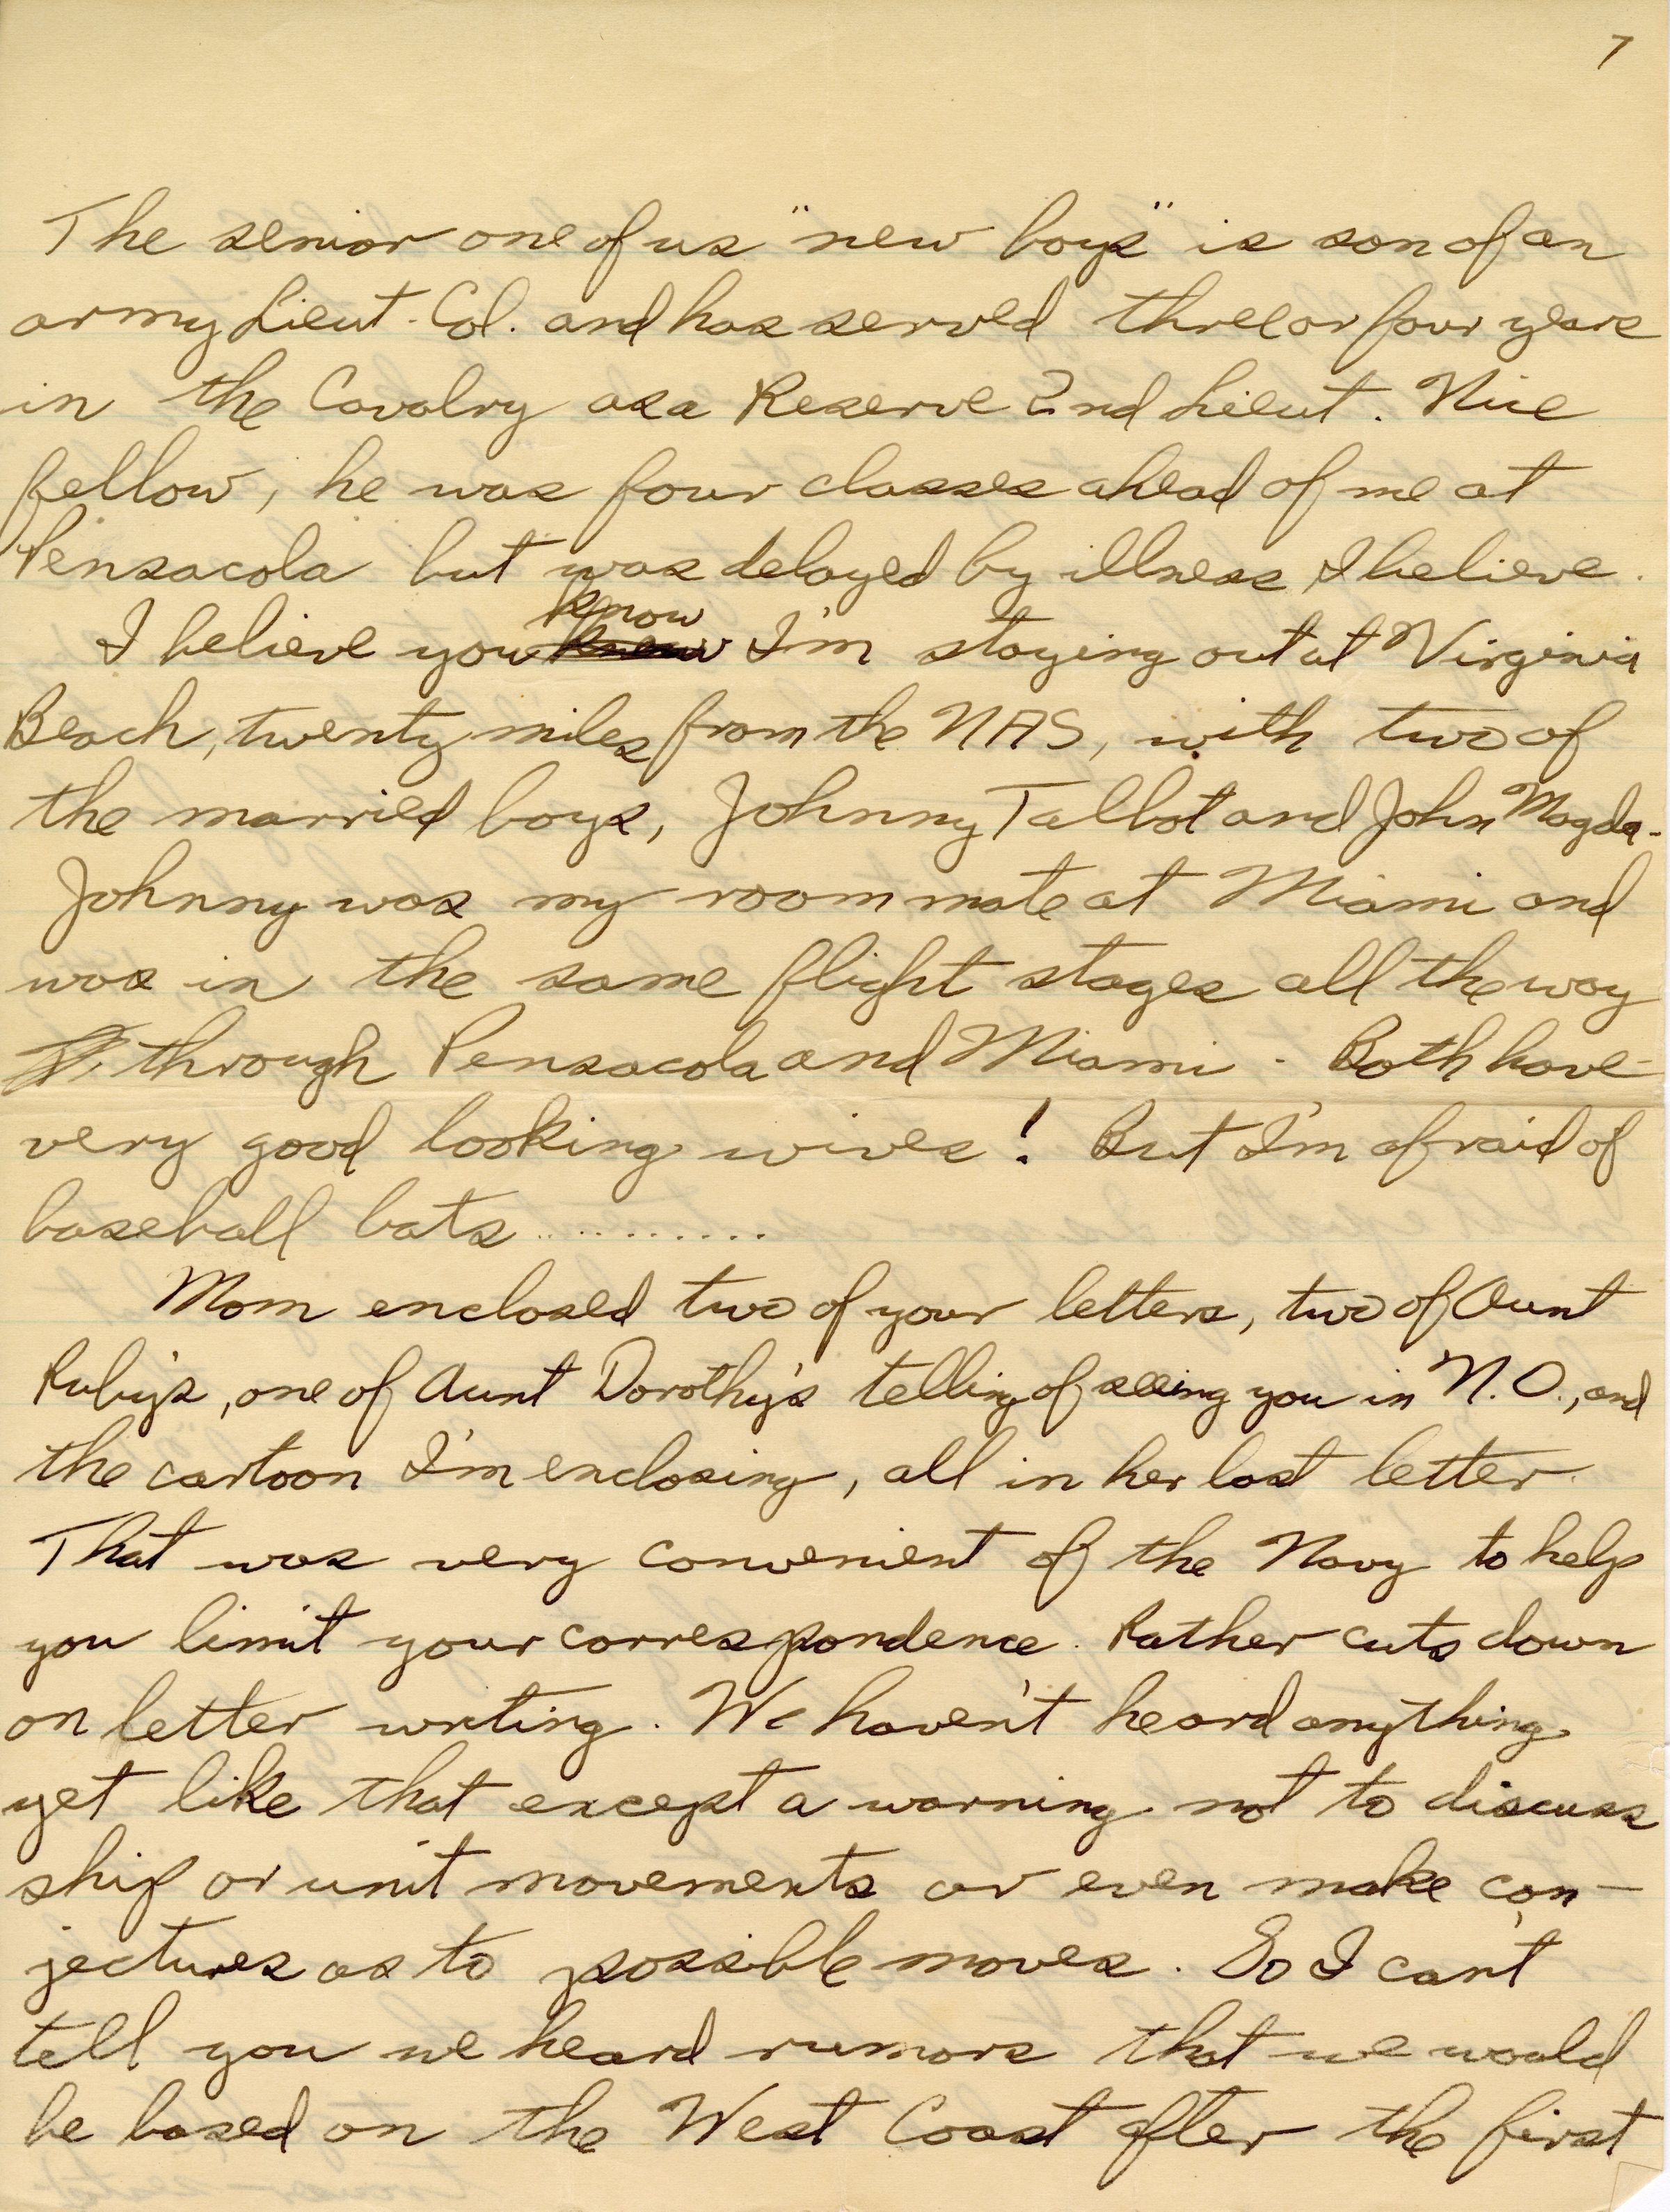 Primary Image of Part of a Letter Sent from Elisha 